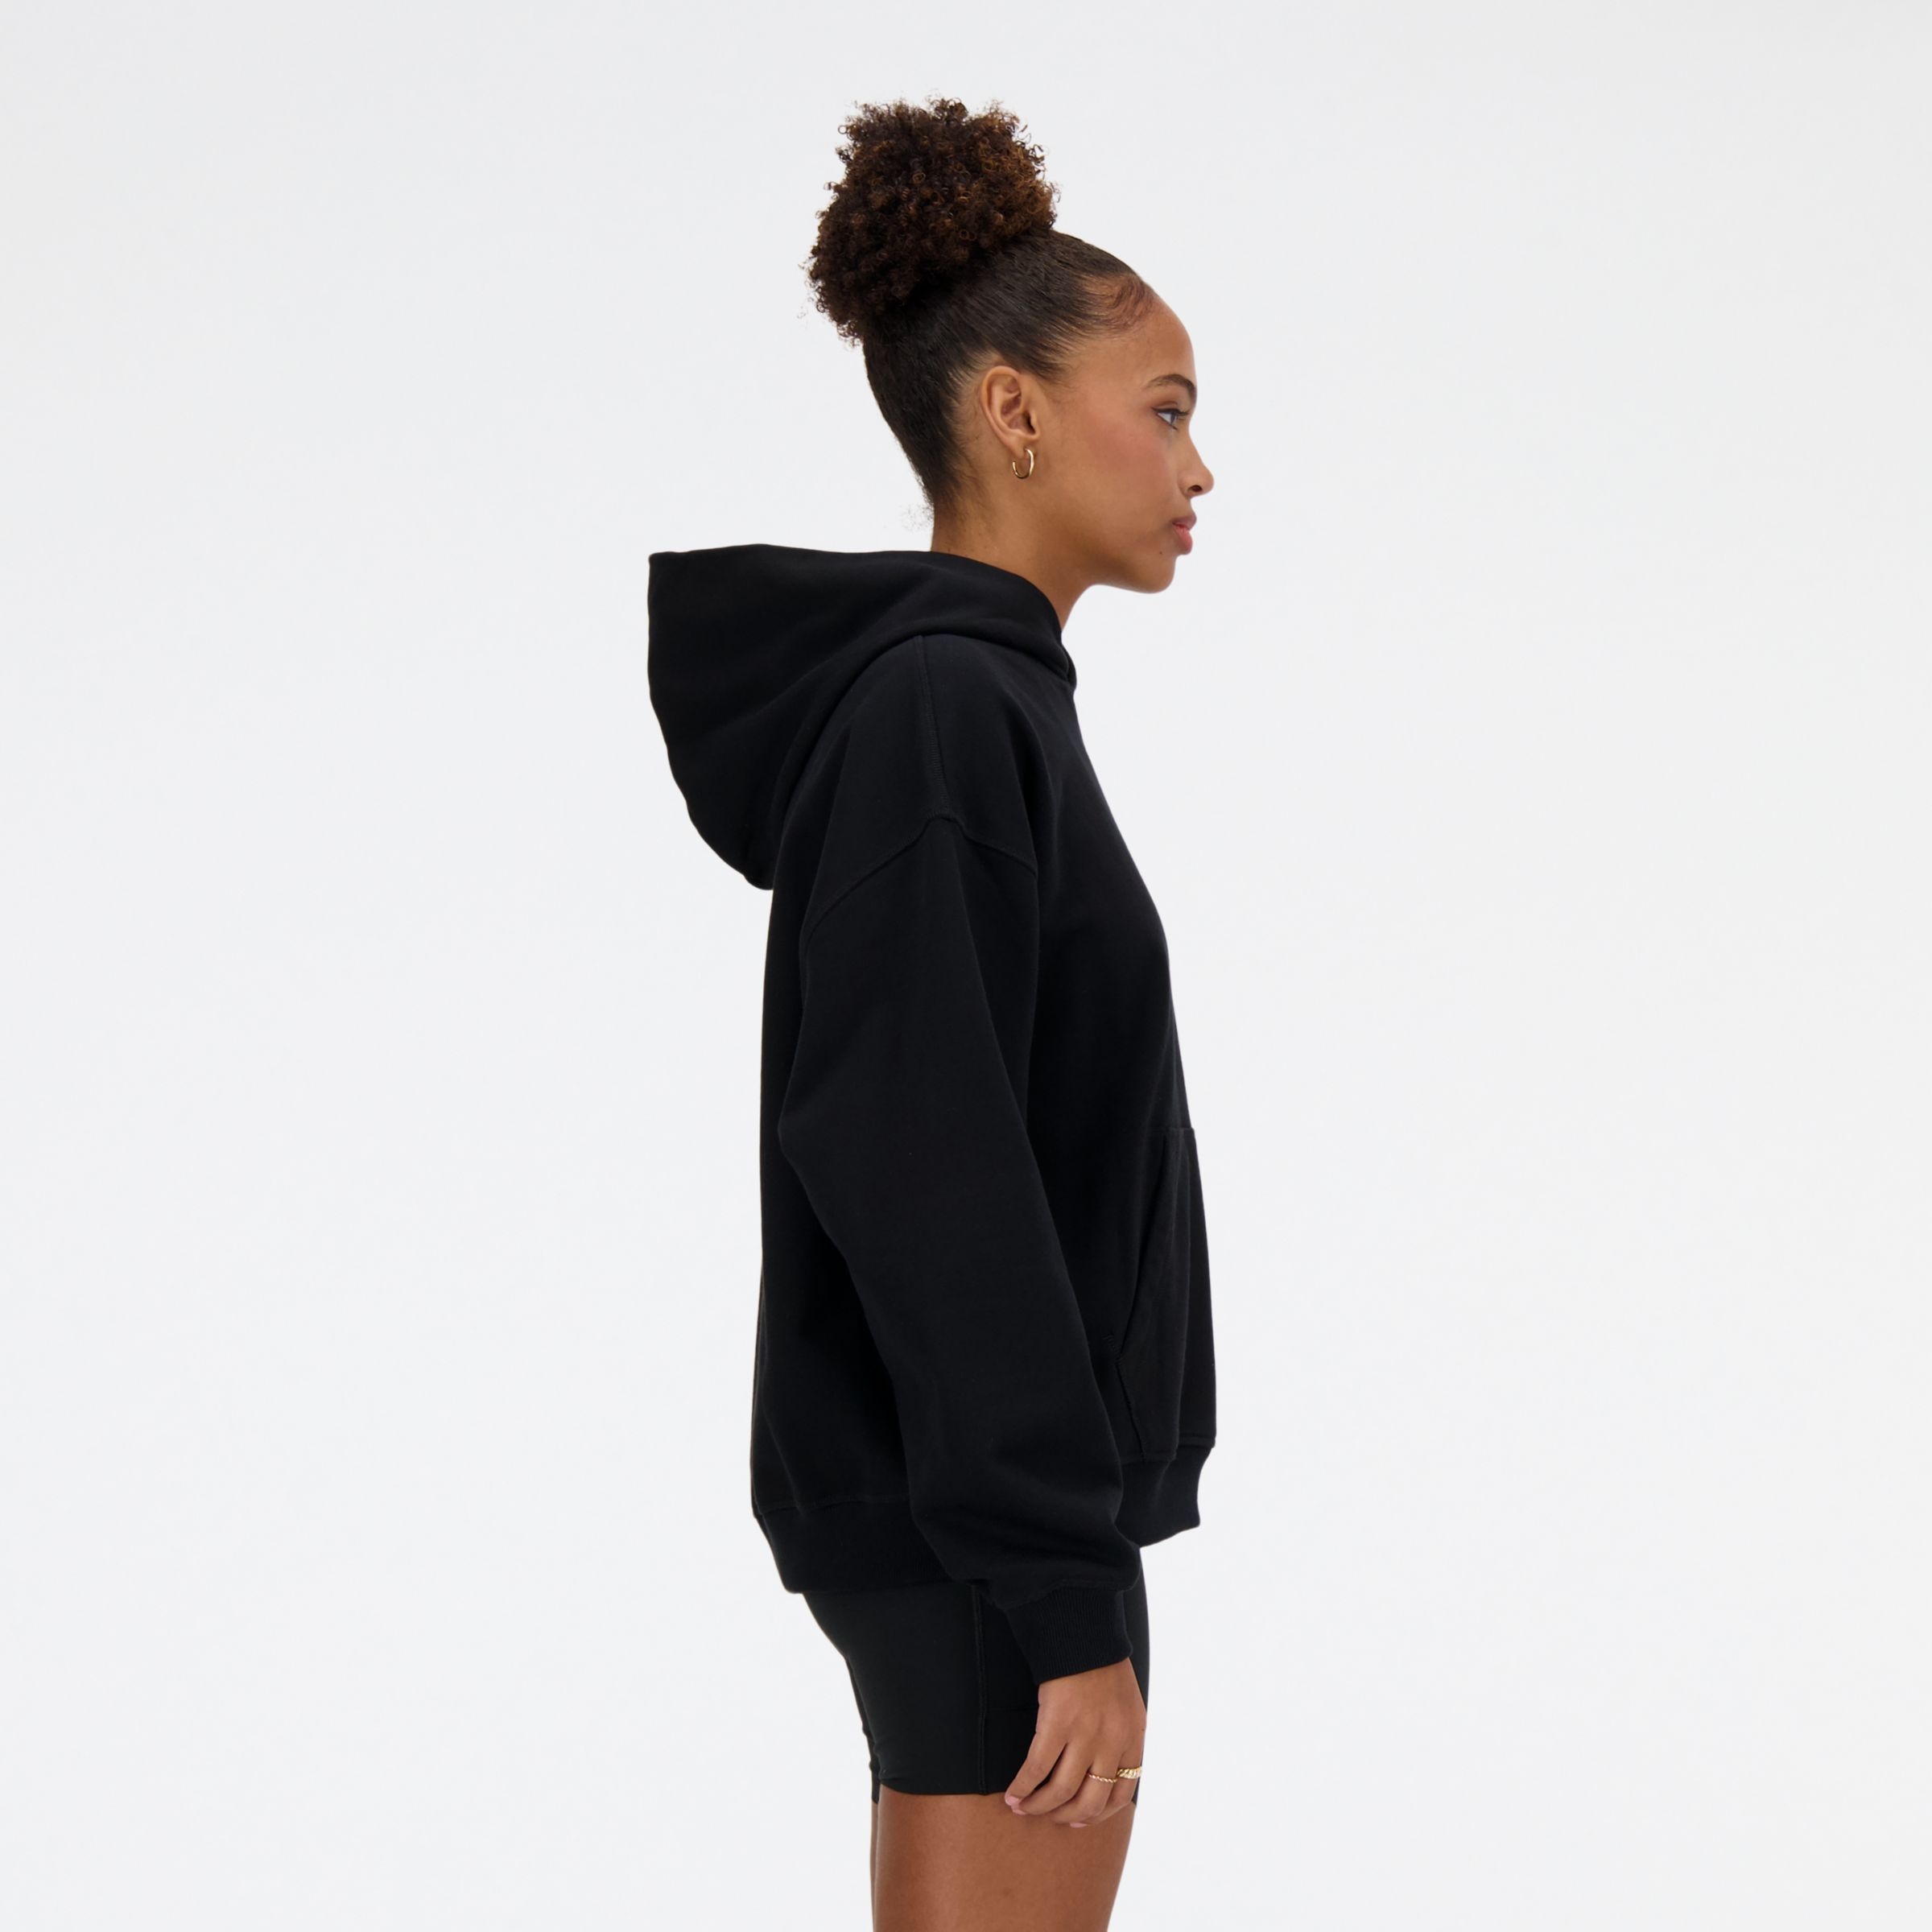 Athletics French Terry Hoodie - 6